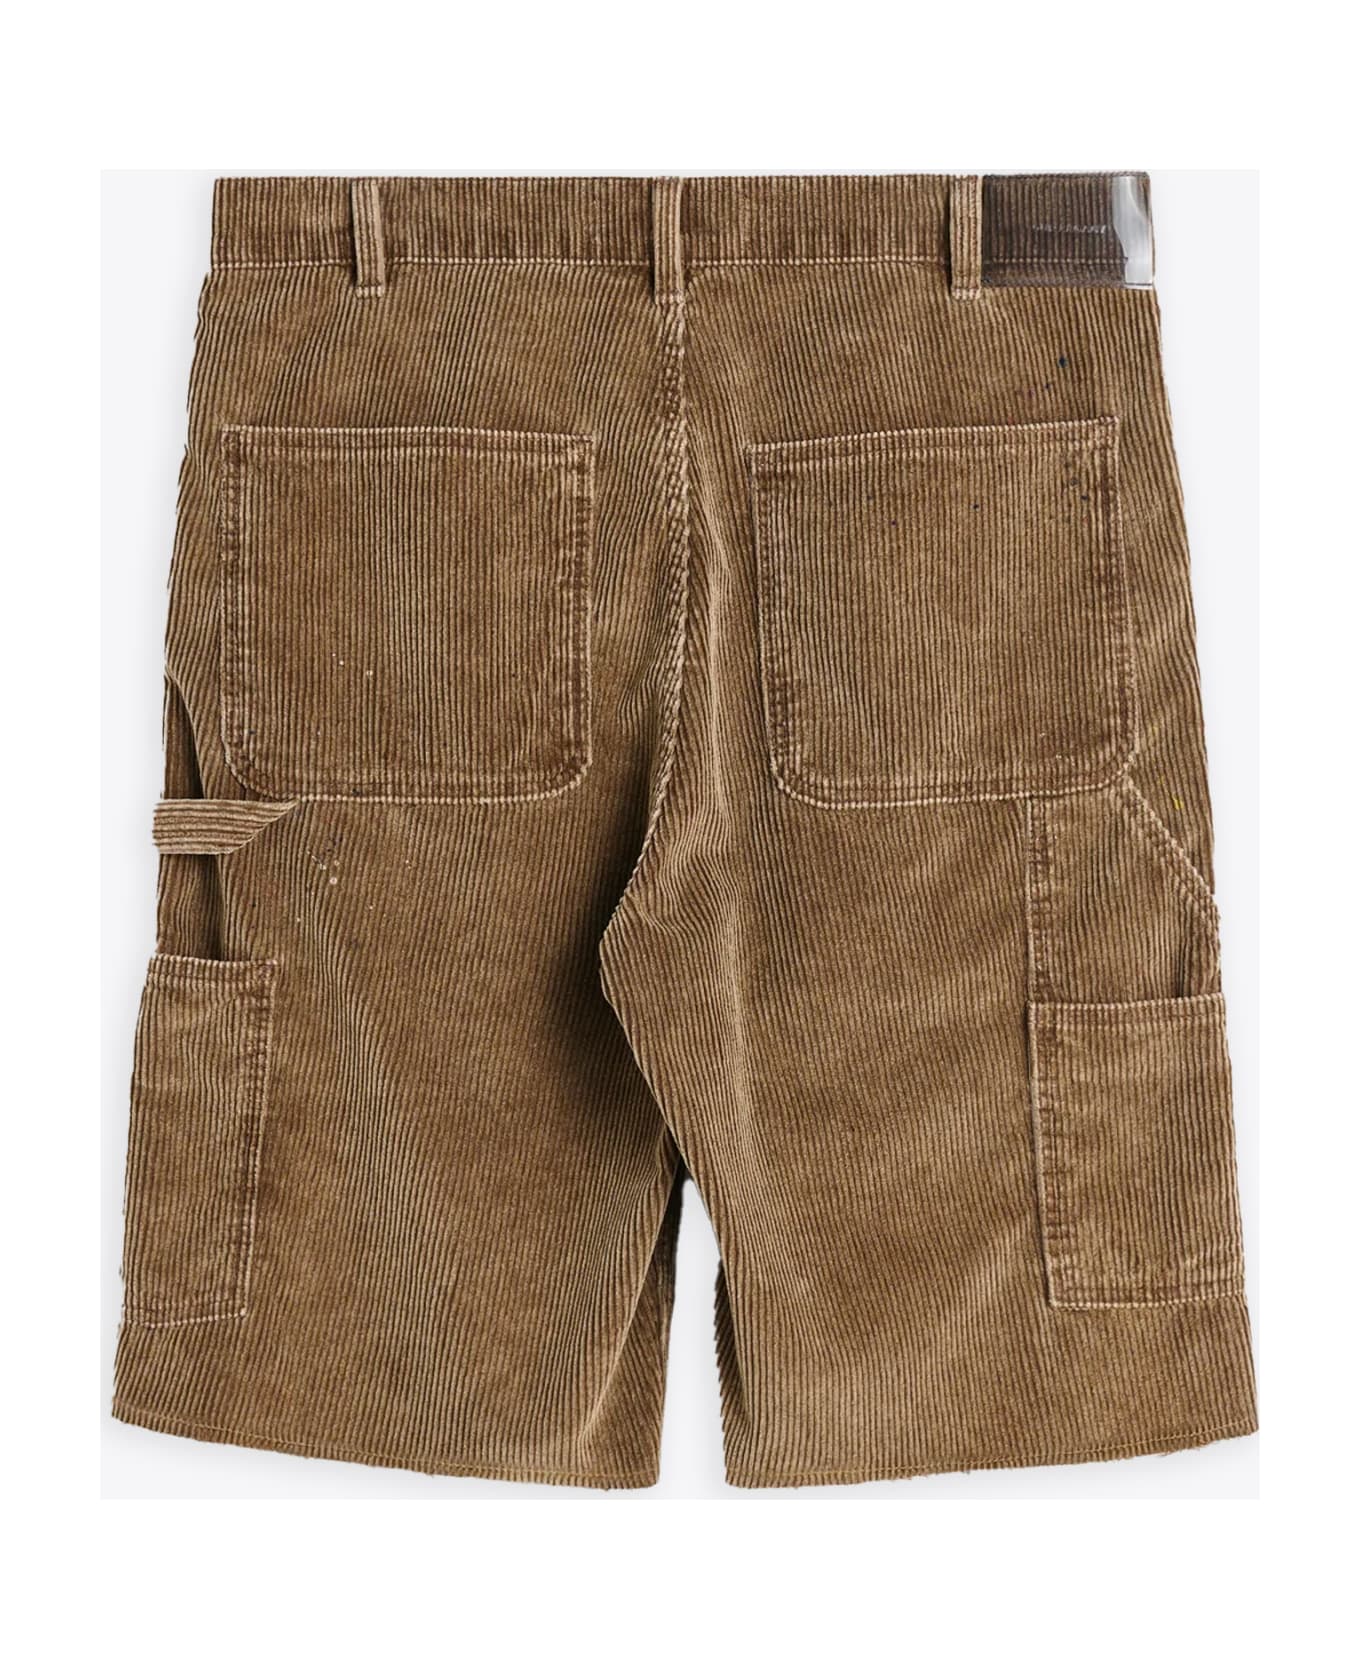 Our Legacy Joiner Short Light brown corduroy work shorts with spray paint - Joiner Short - Tortora